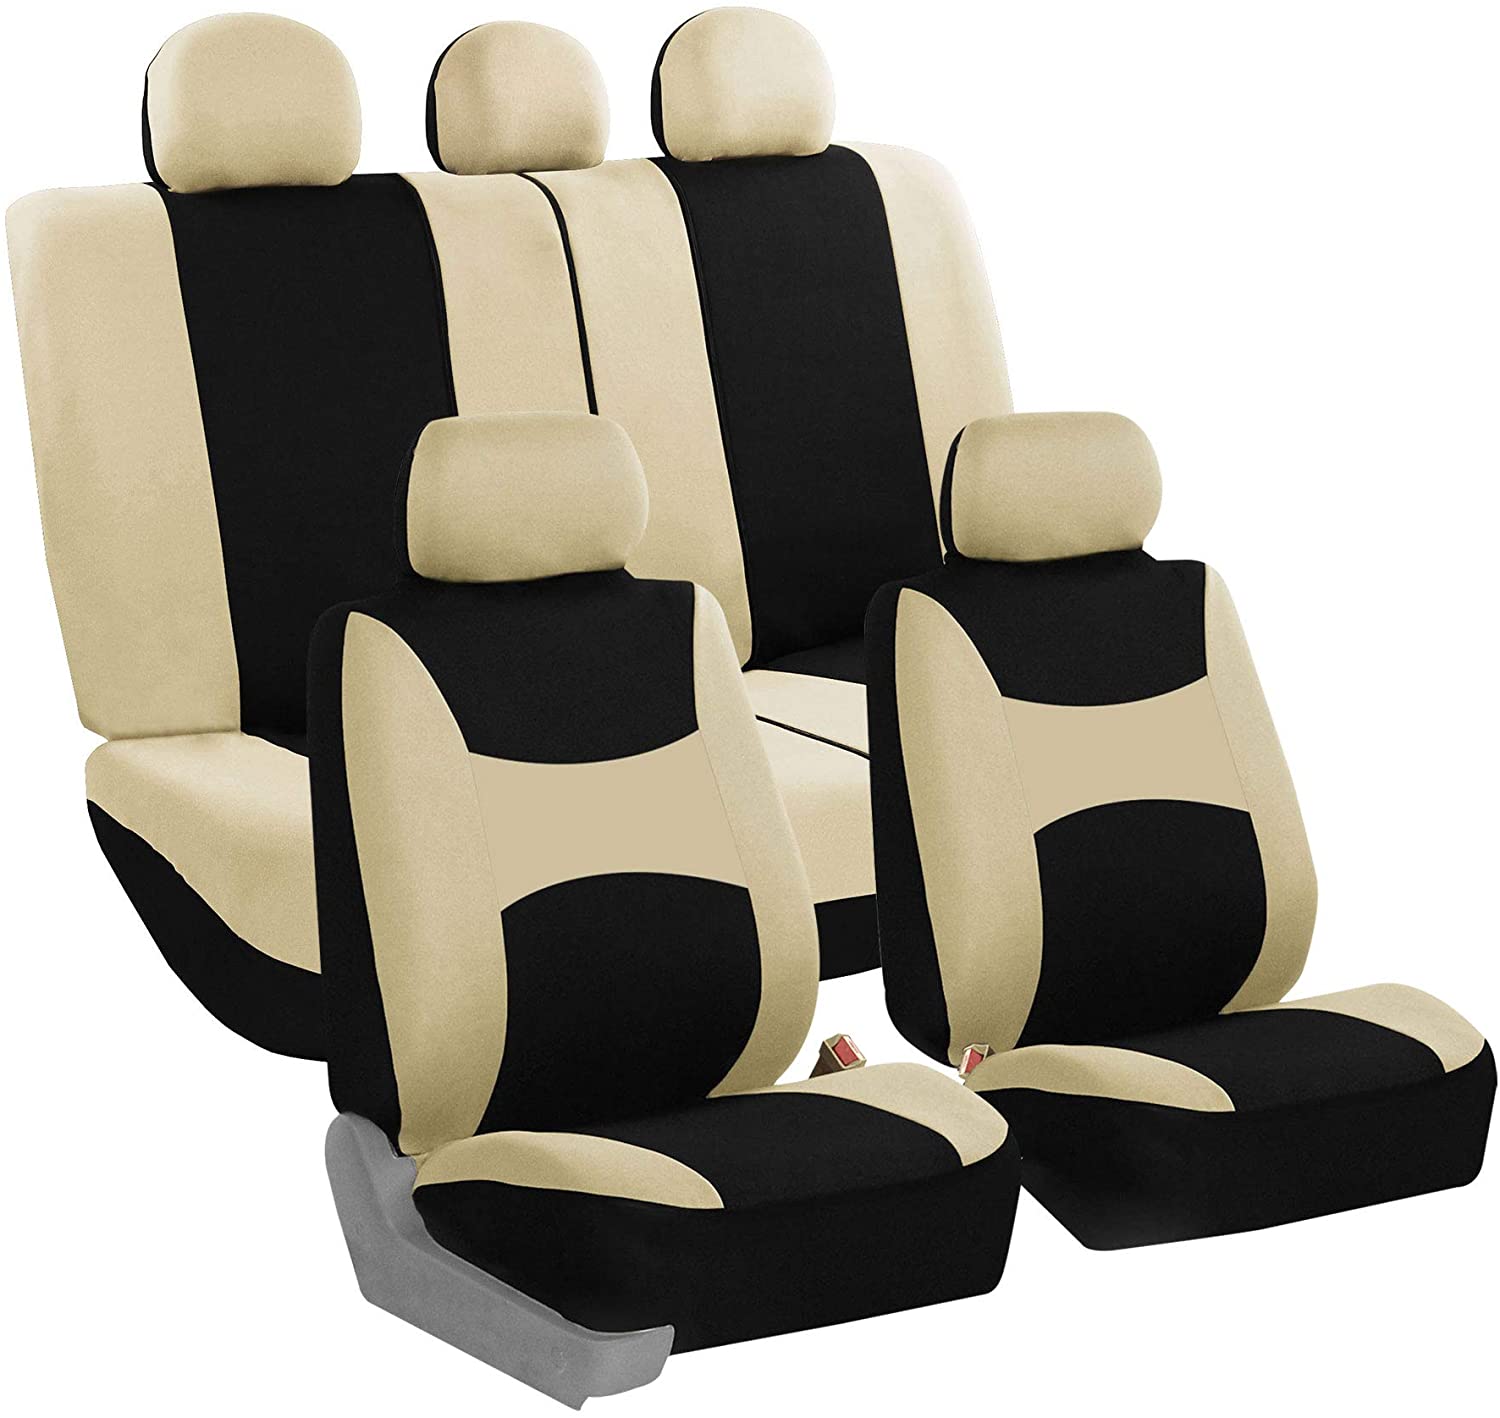 10 Best Seat Covers For Nissan Rogue - Wonderful Engineering